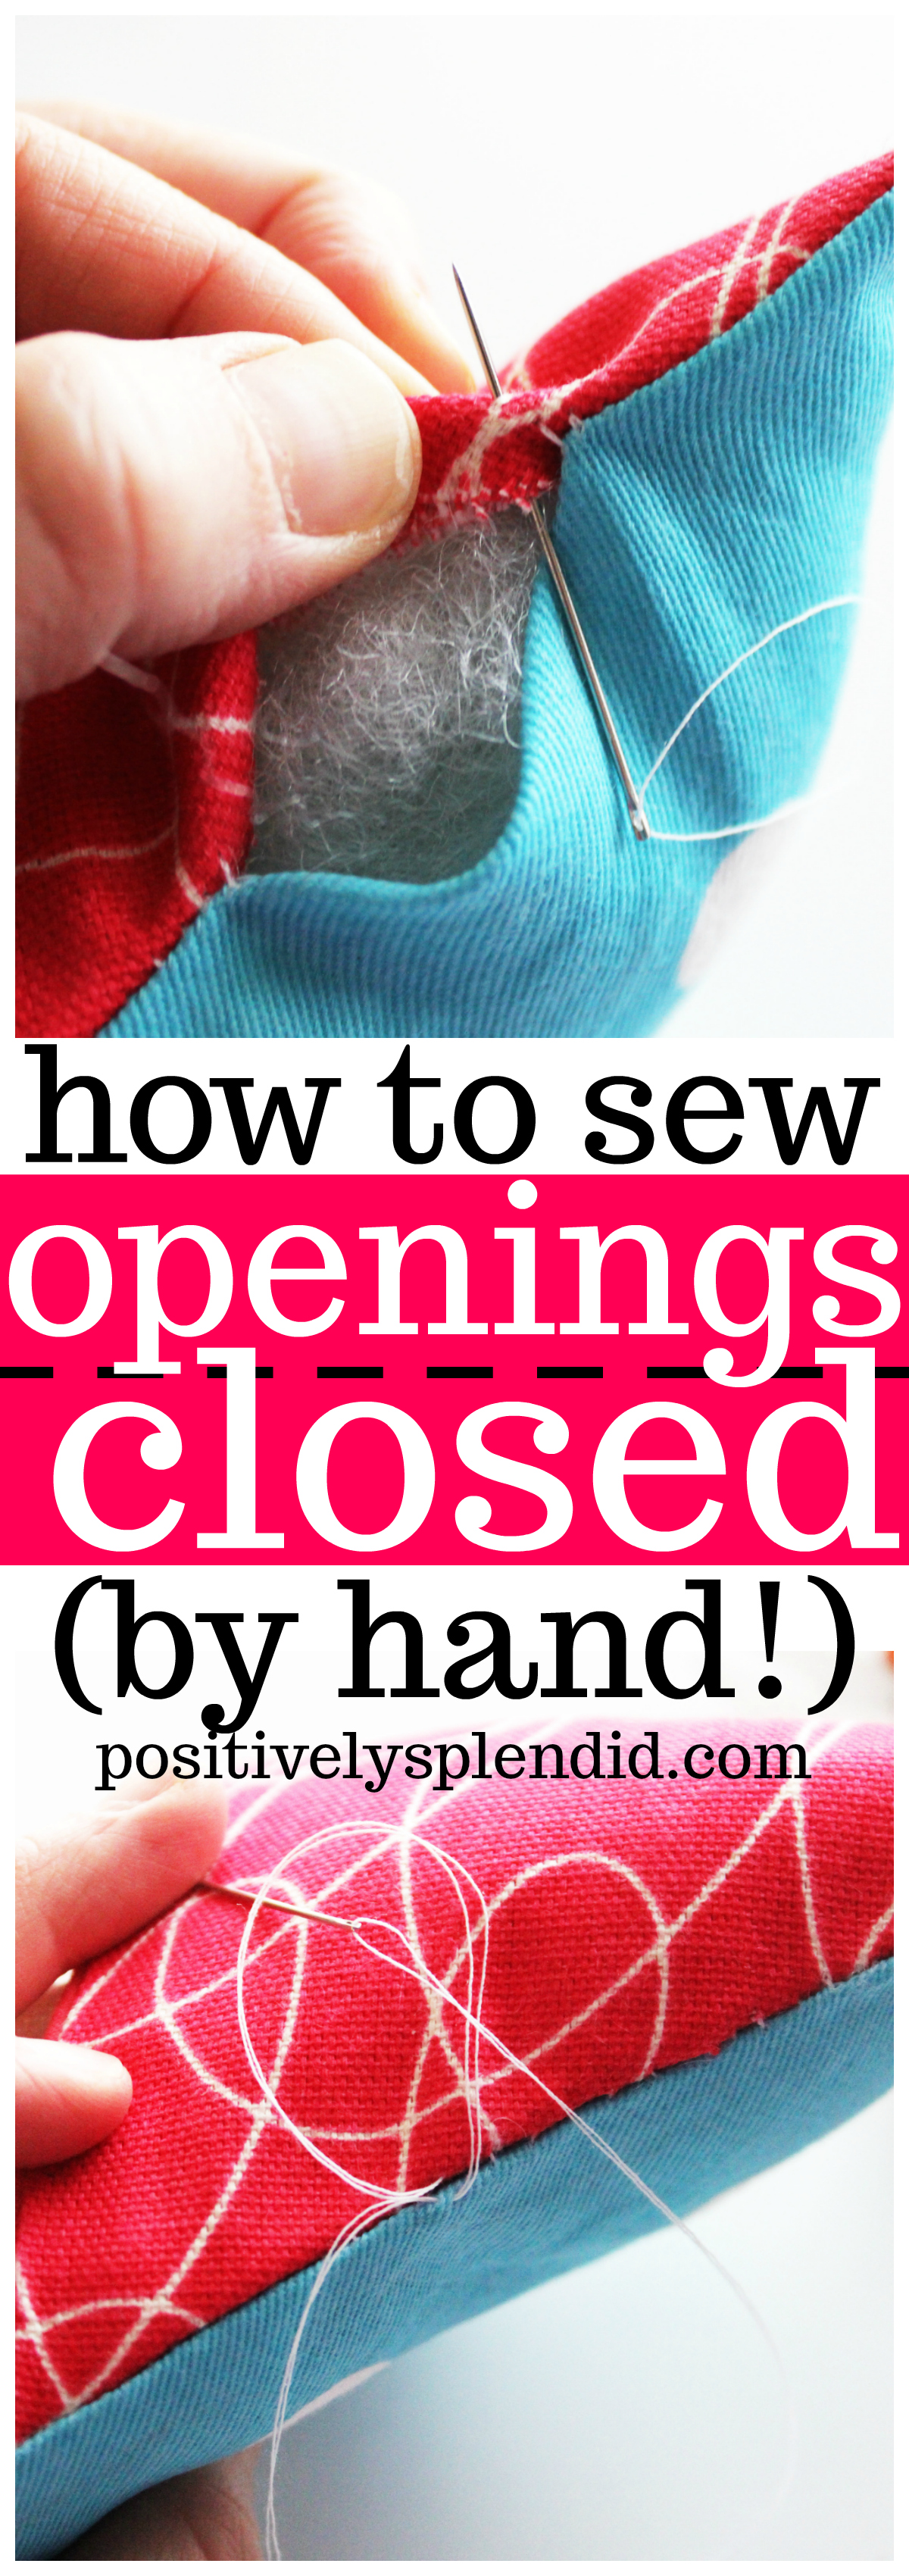 How to sew openings closed